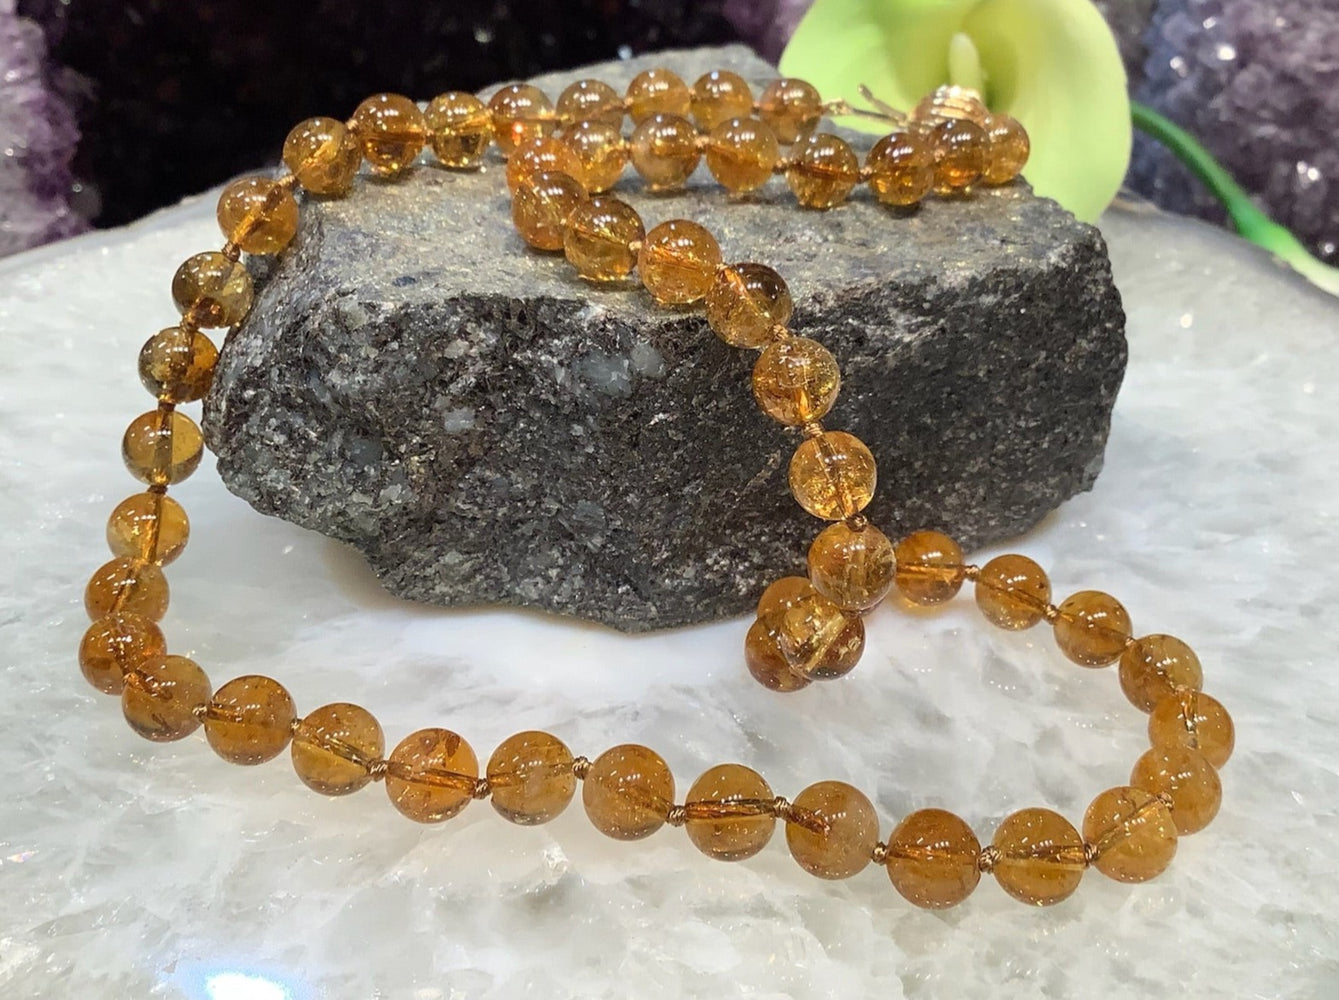 Rare Quality Golden Uruguay Citrine Gemstone Necklace with Gold Clasp